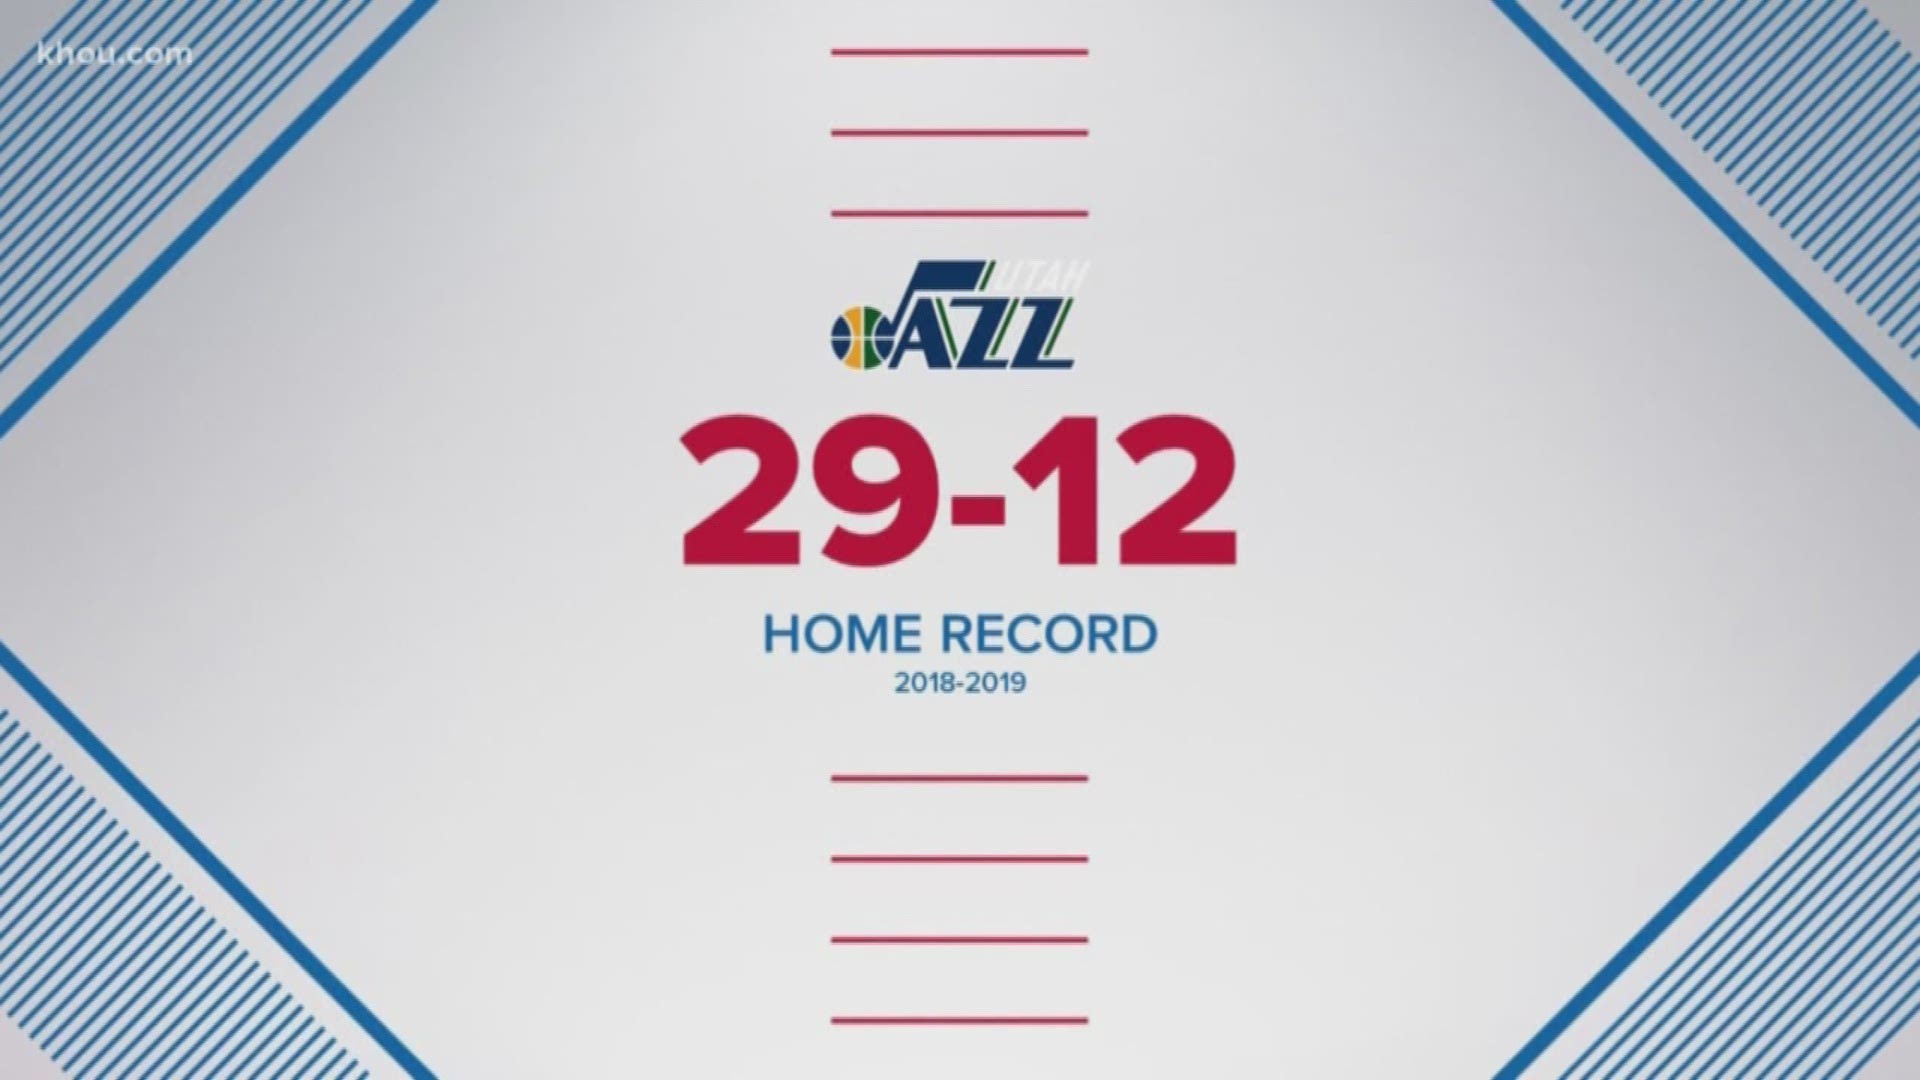 The Houston Rockets lead the first-round series against the Utah Jazz 2-0 after winning both home games. But how will the Rockets contend with that infamous Utah crowd?